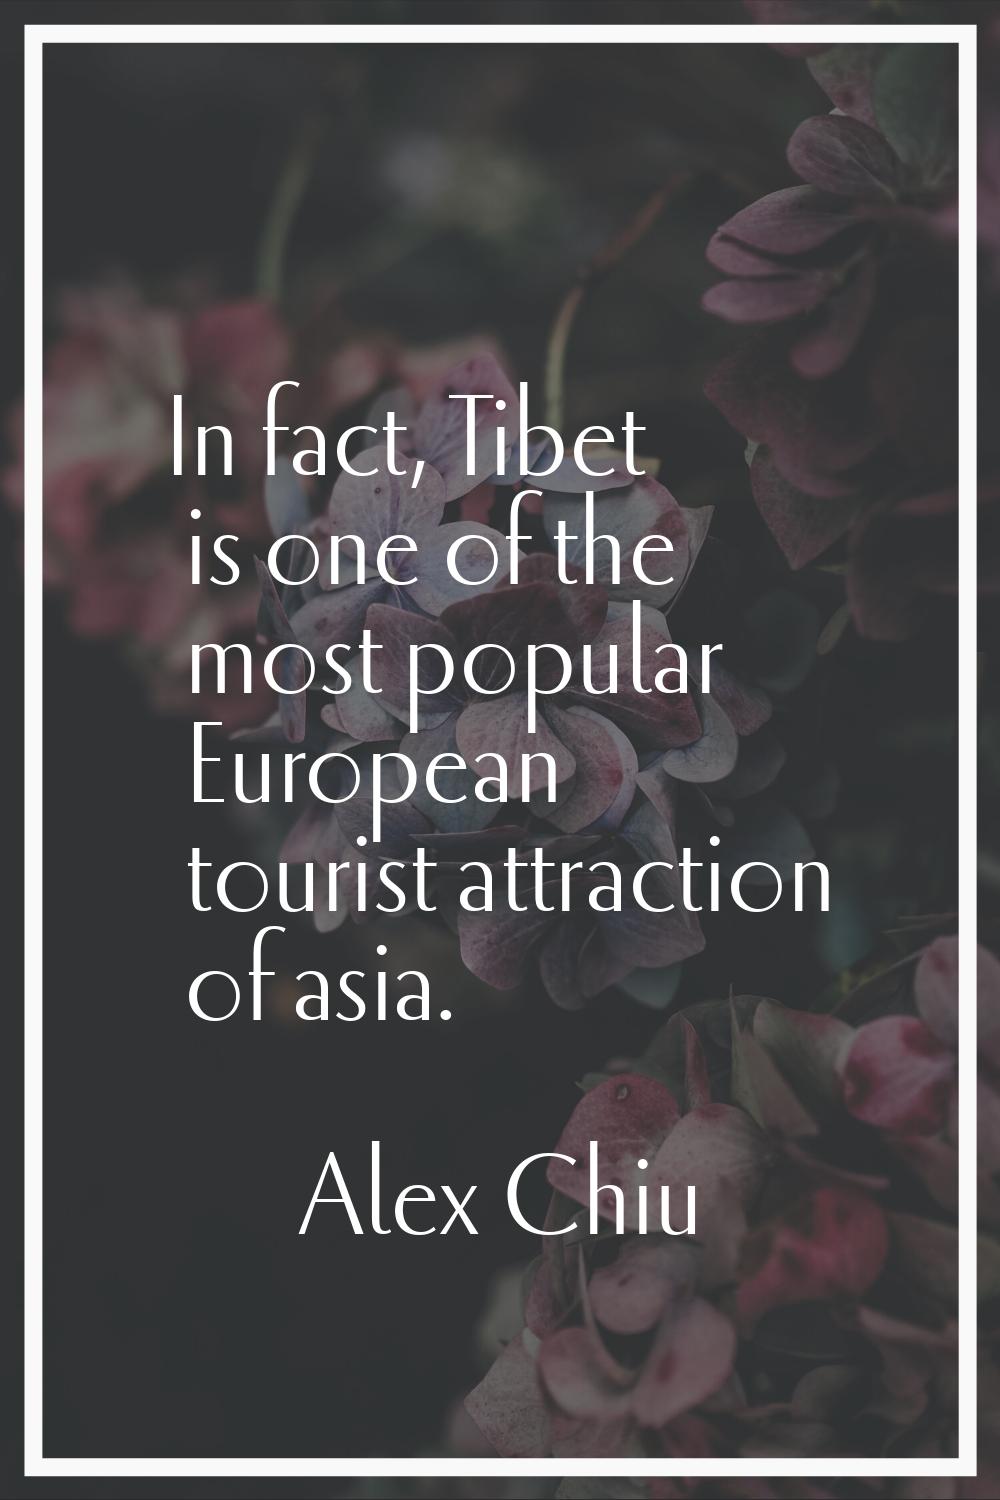 In fact, Tibet is one of the most popular European tourist attraction of asia.